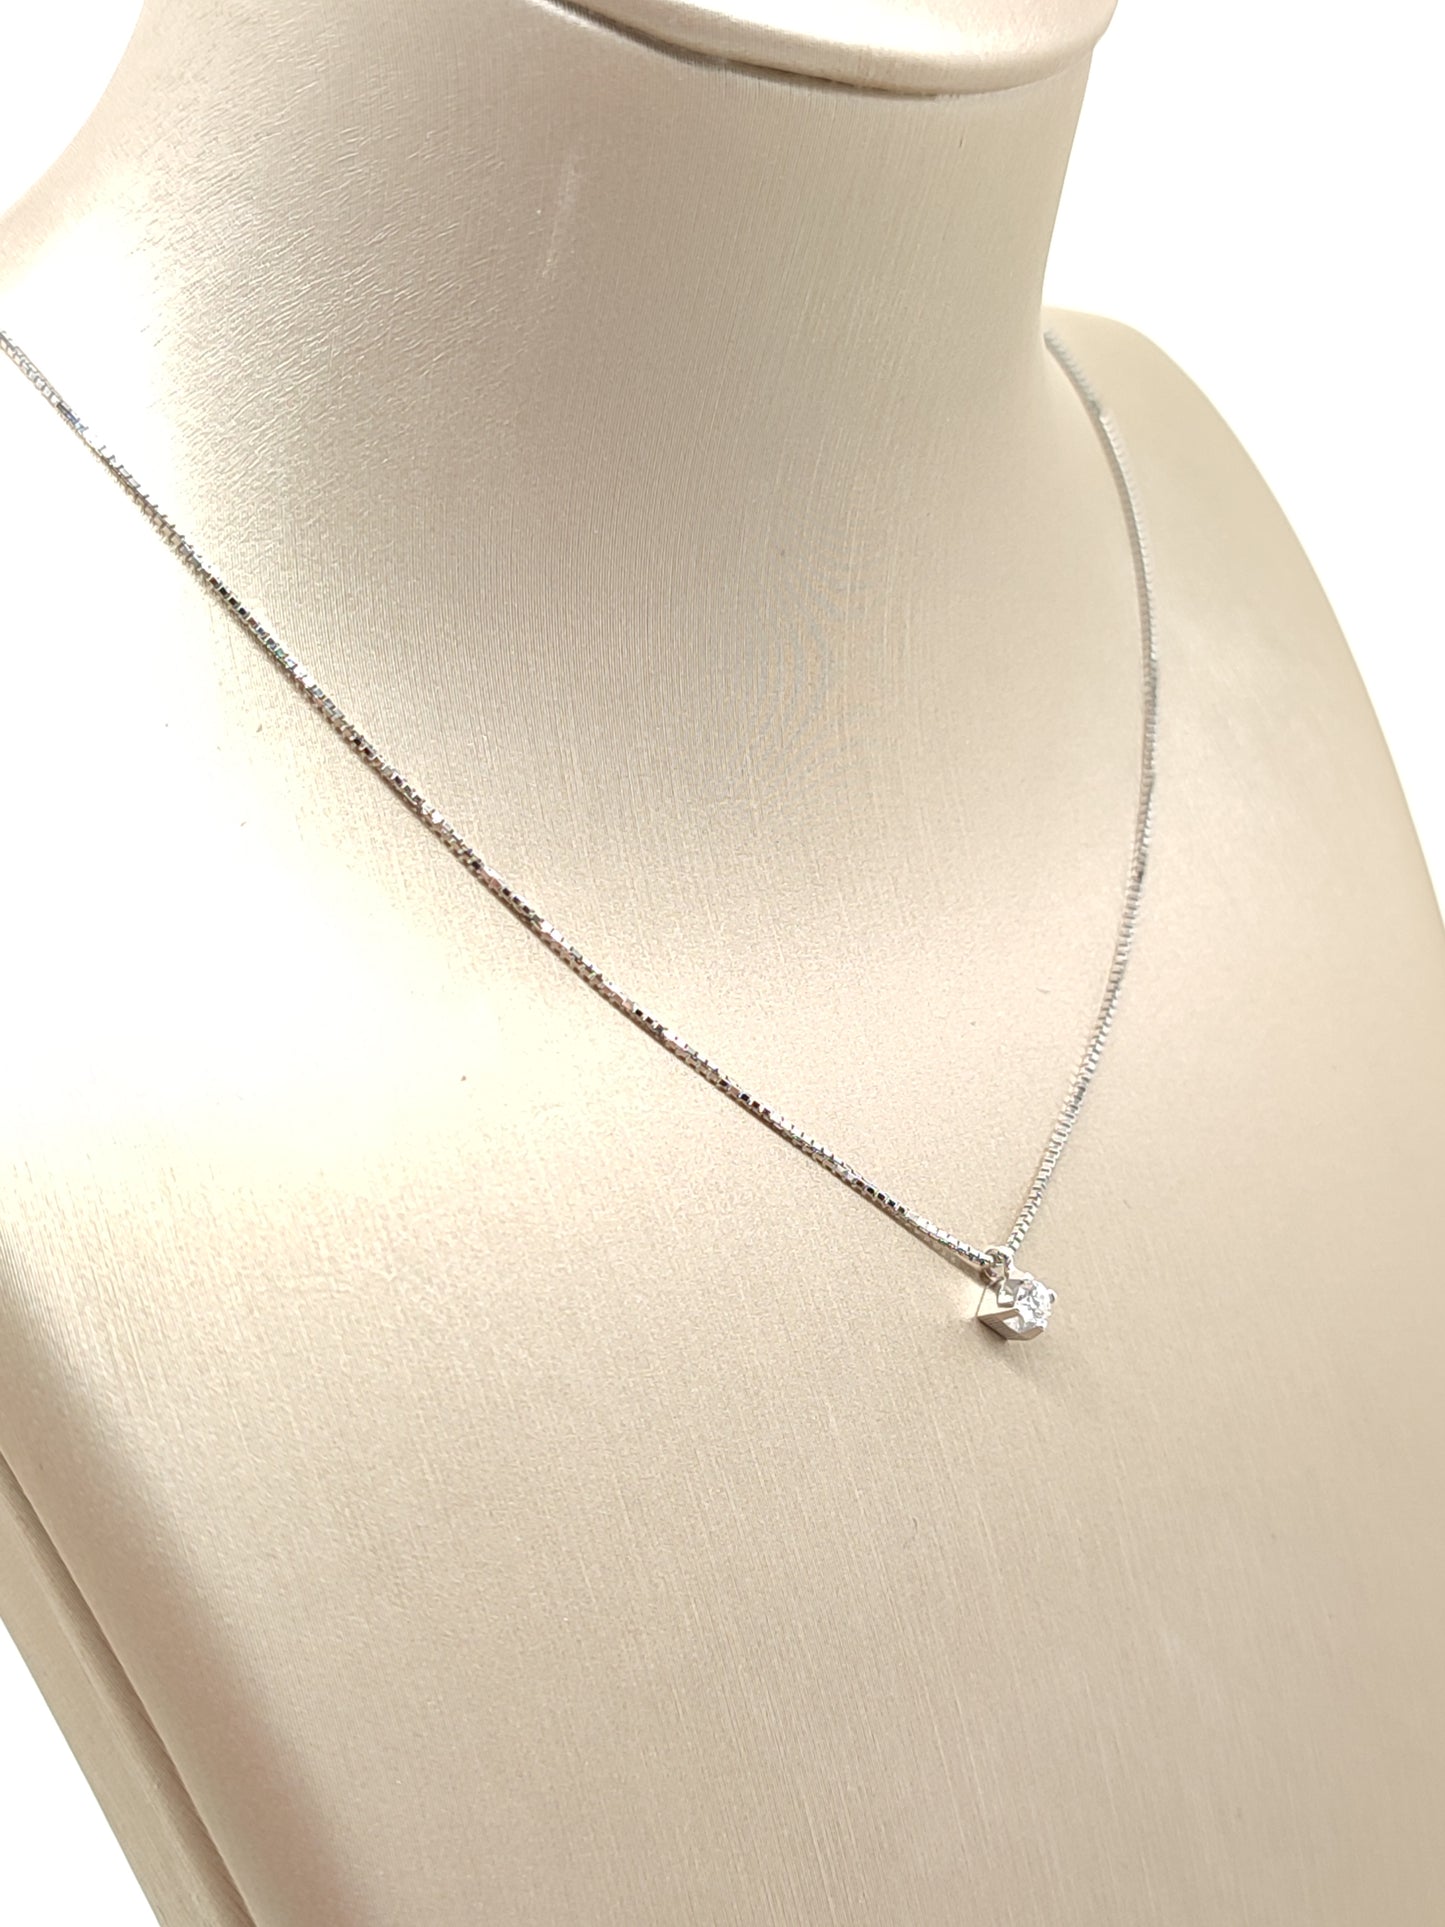 Gold necklace with 0.05ct light point diamond